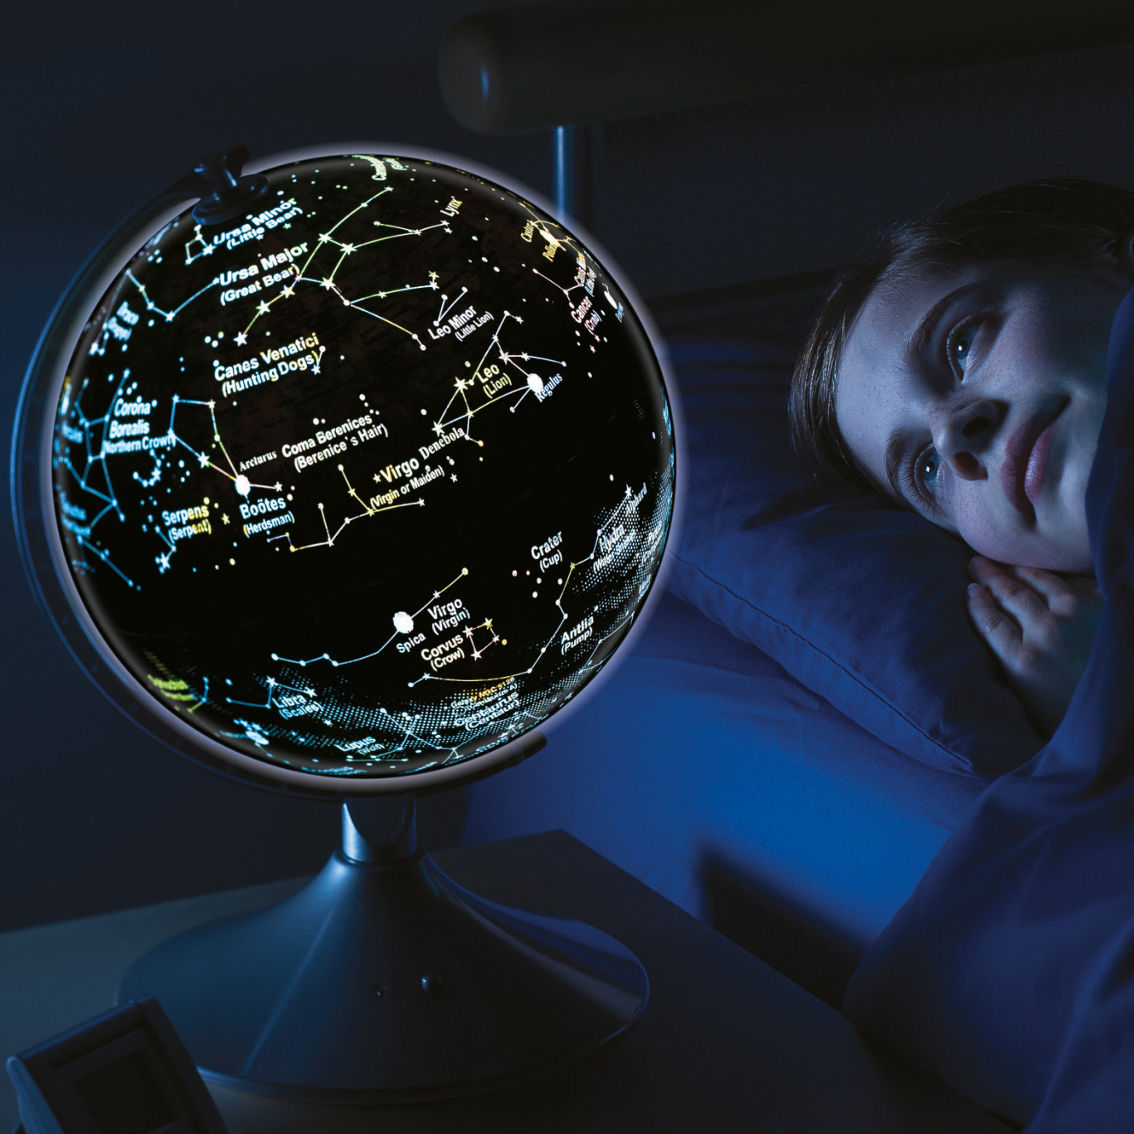 Brainstorm Toys 2 in 1 Globe, Earth and Constellations - Image 4 of 5